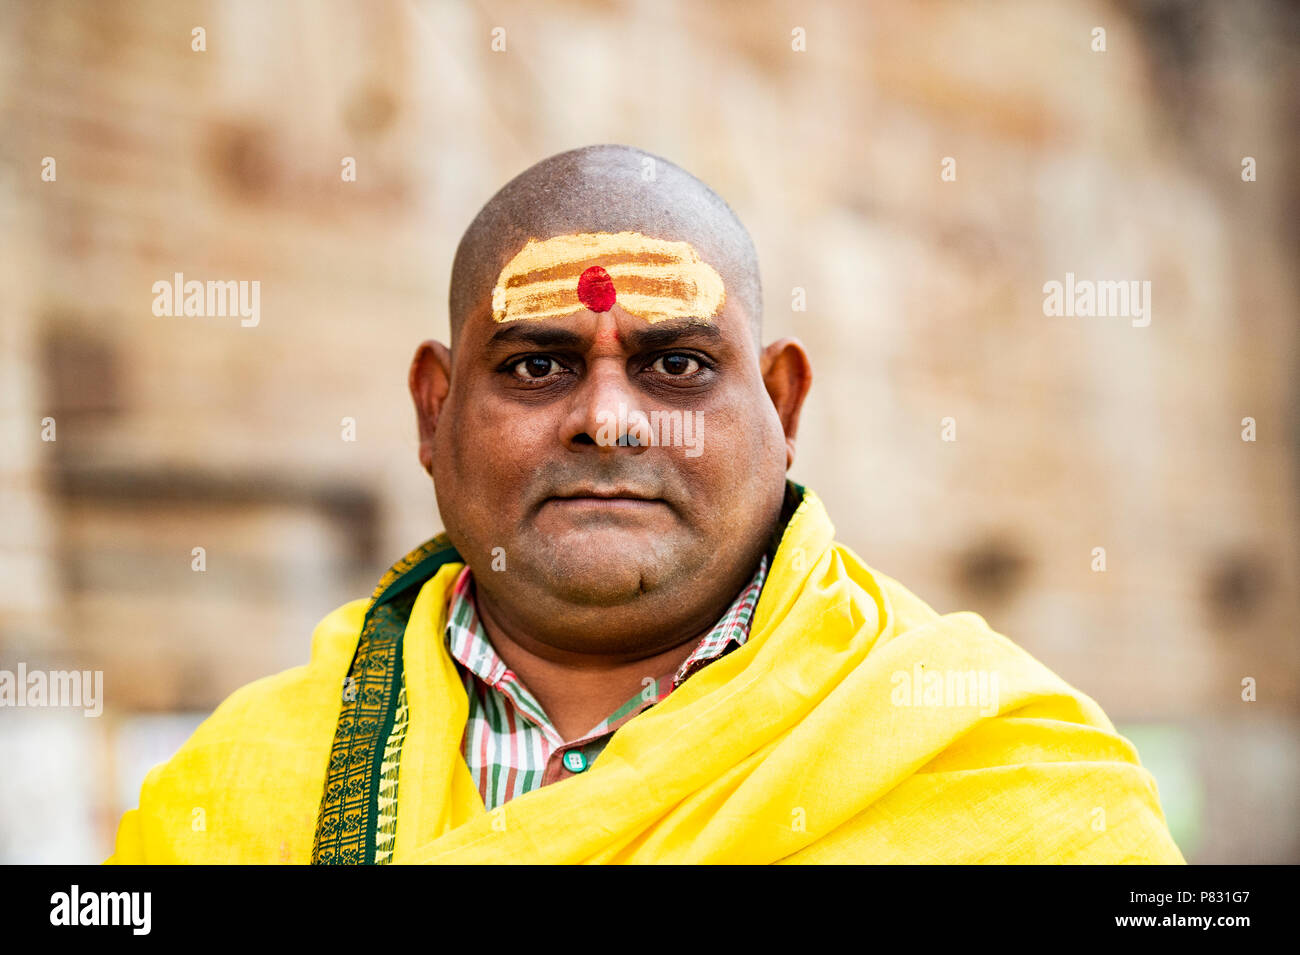 VARANASI - INDIA - 13 JANUARY 2018. Portrait of a shaved man walking on the ghat in Varanasi also known as Benares, India. Stock Photo